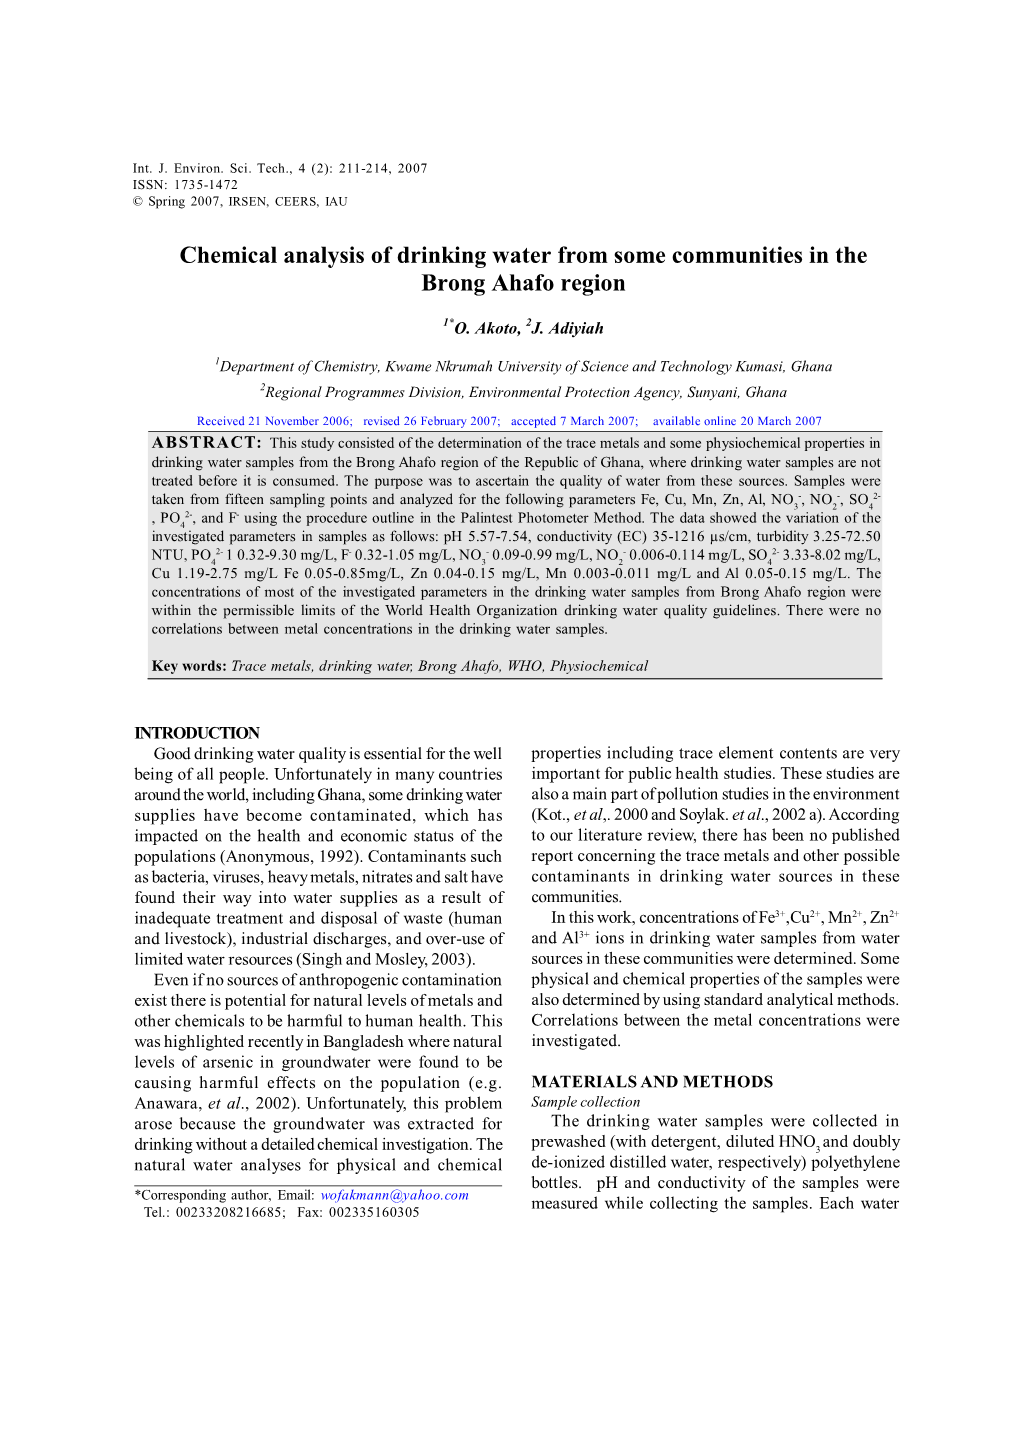 Chemical Analysis of Drinking Water from Some Communities in the Brong Ahafo Region